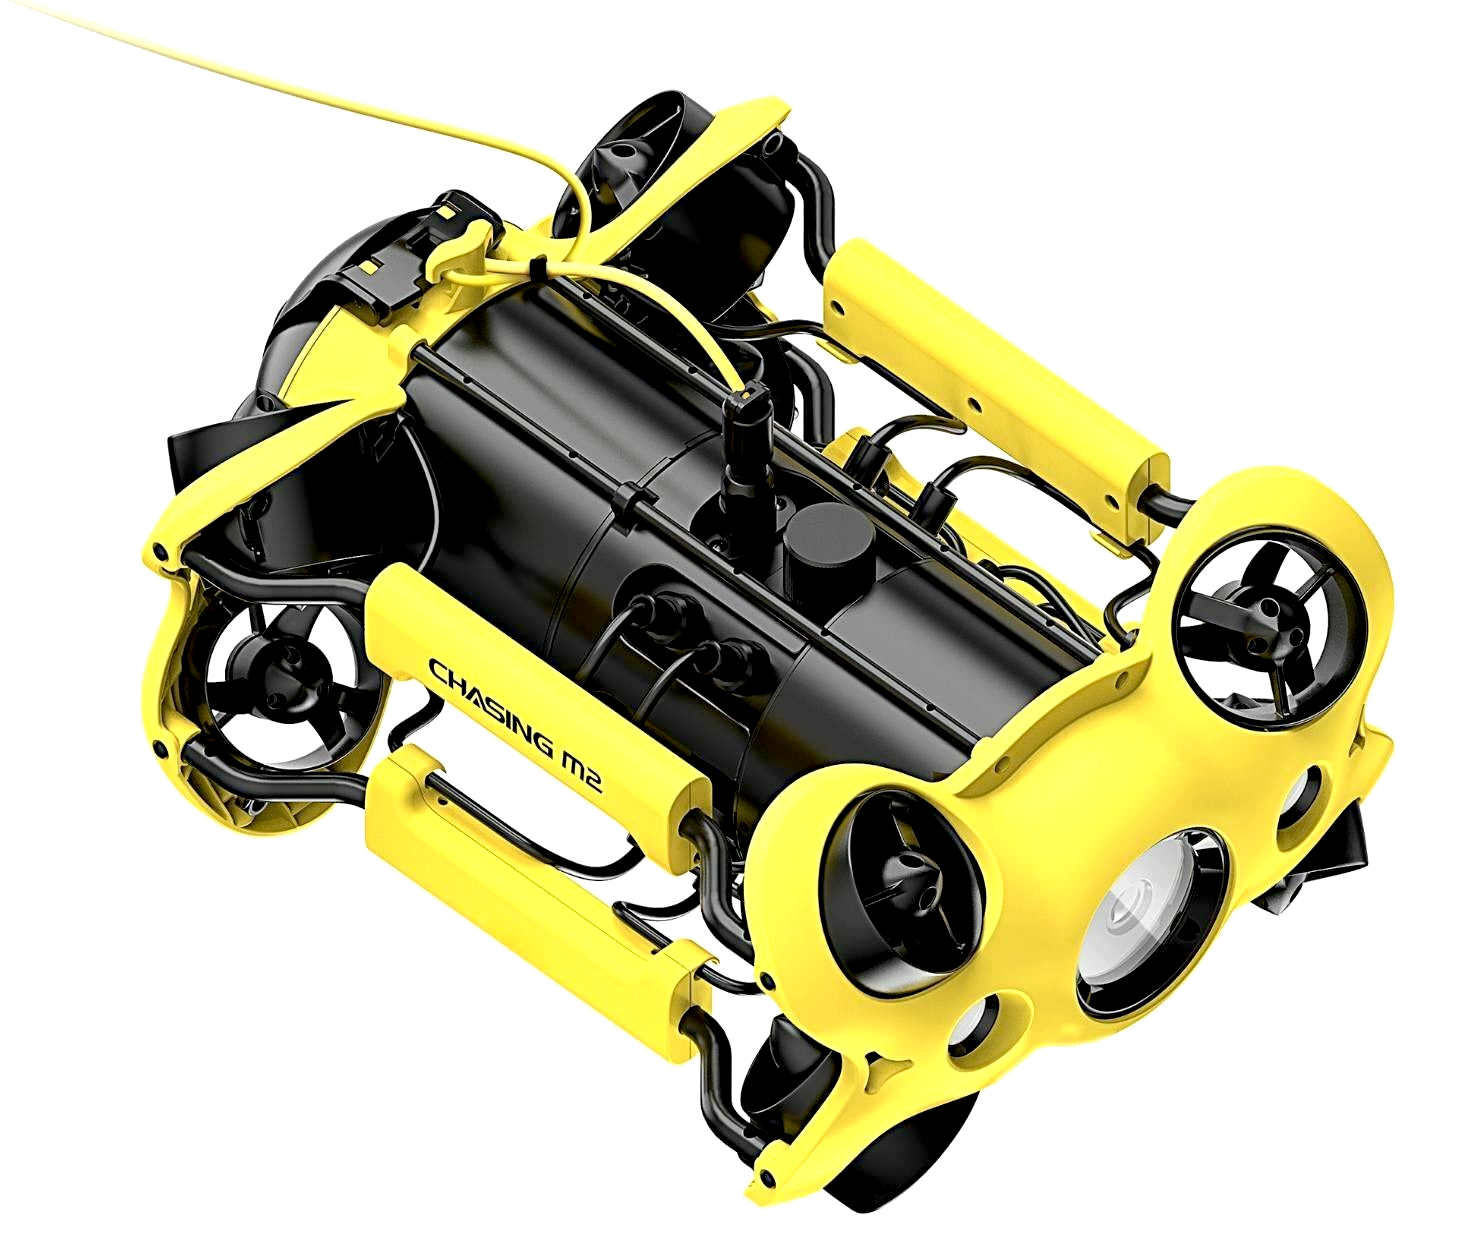 An affordable ROV solution for local projects and scouting